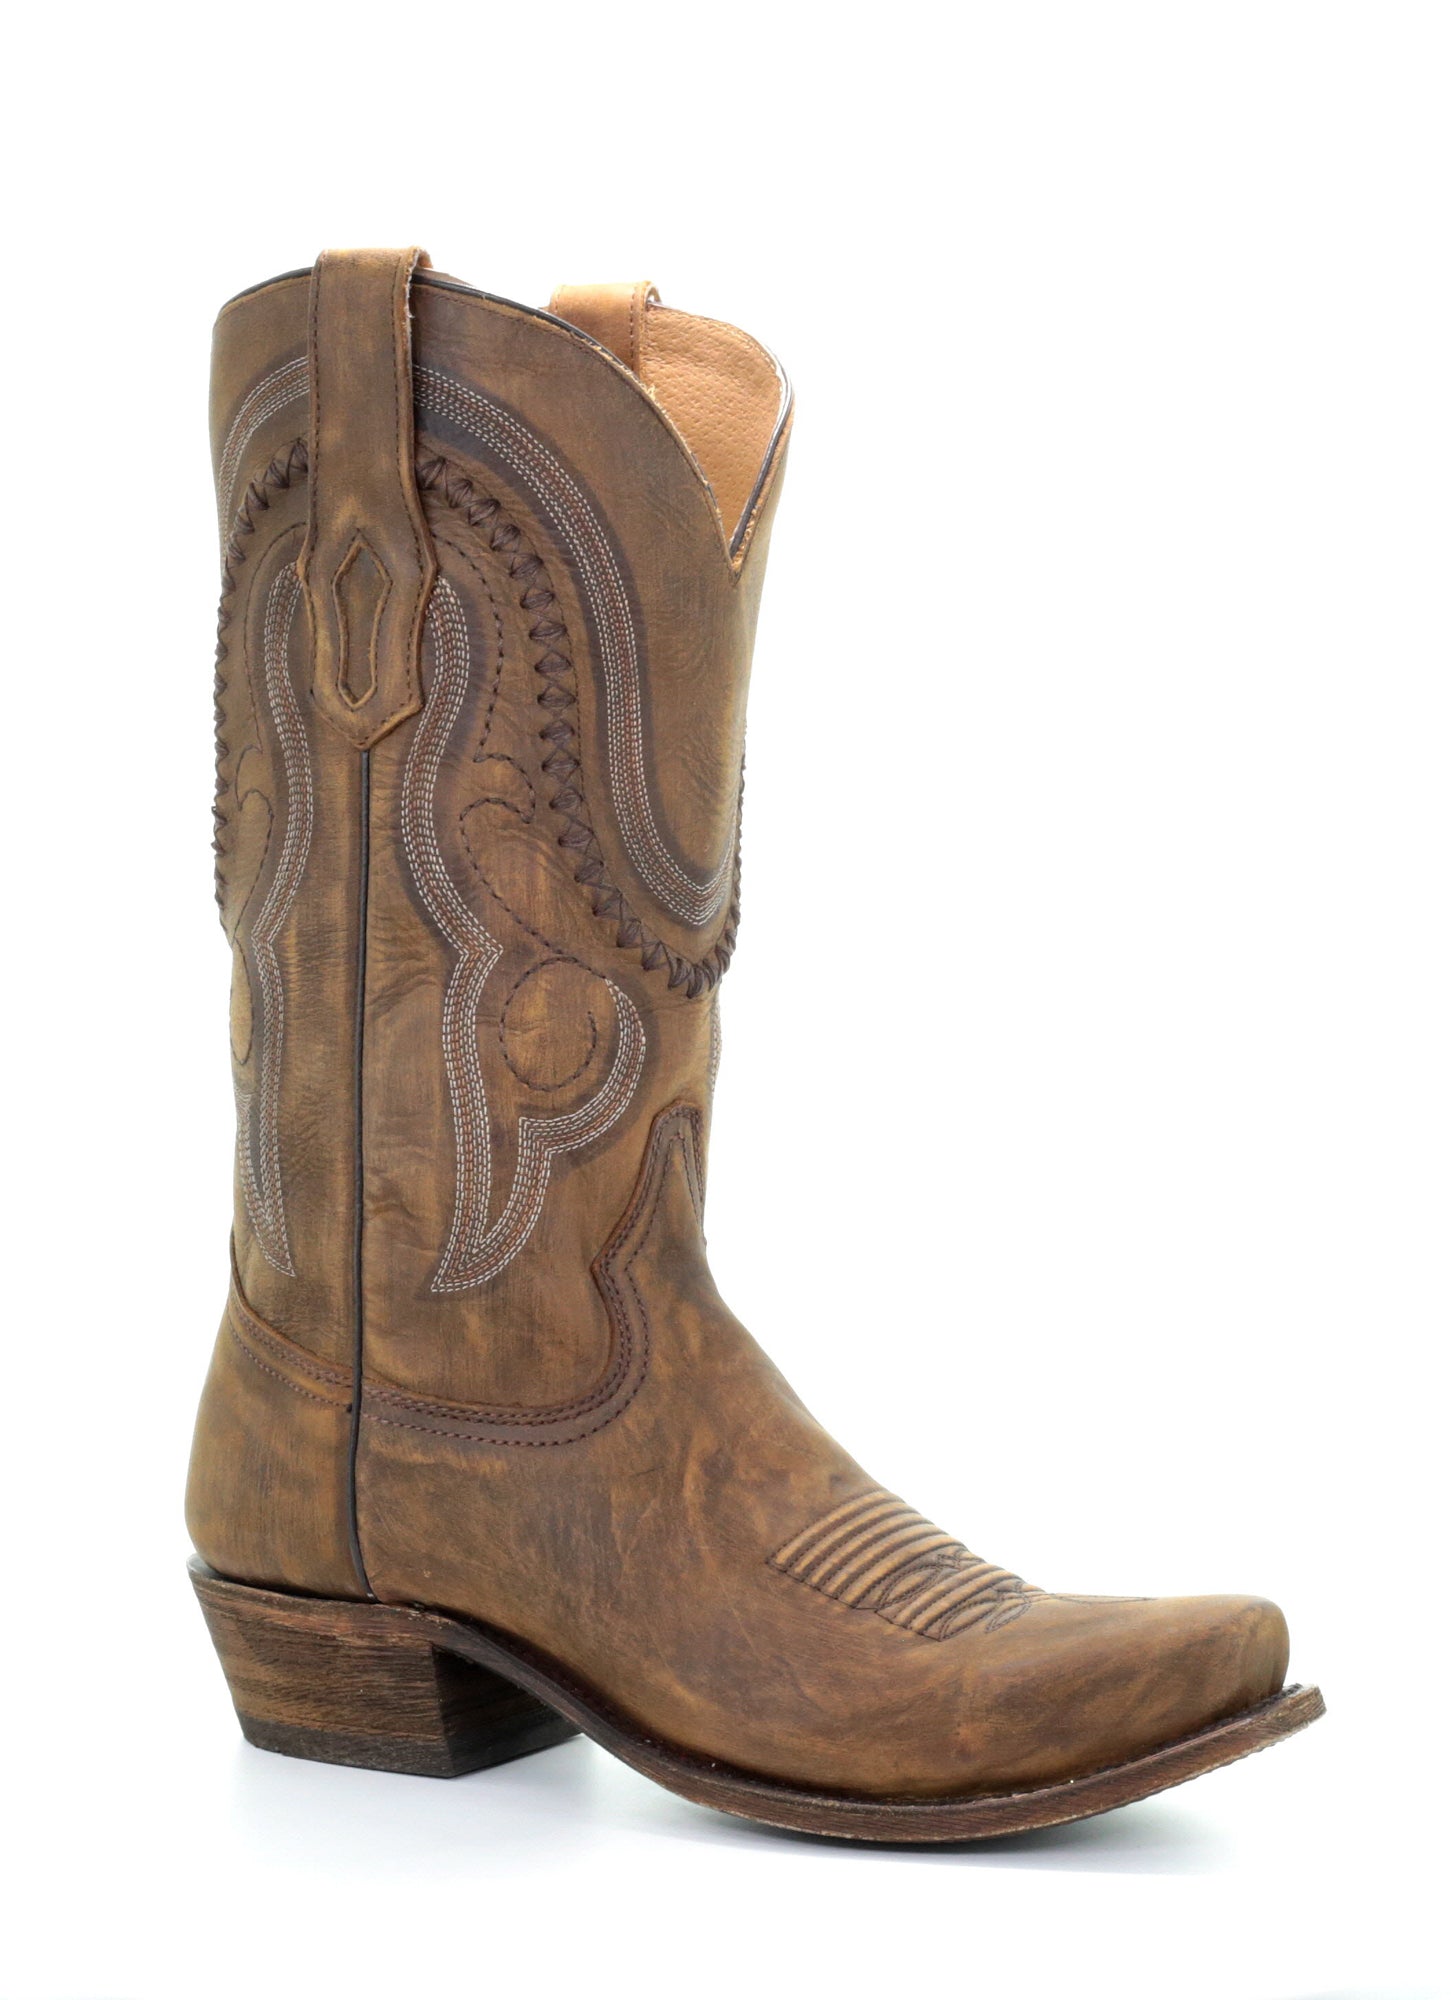 leather cowboy boots for men